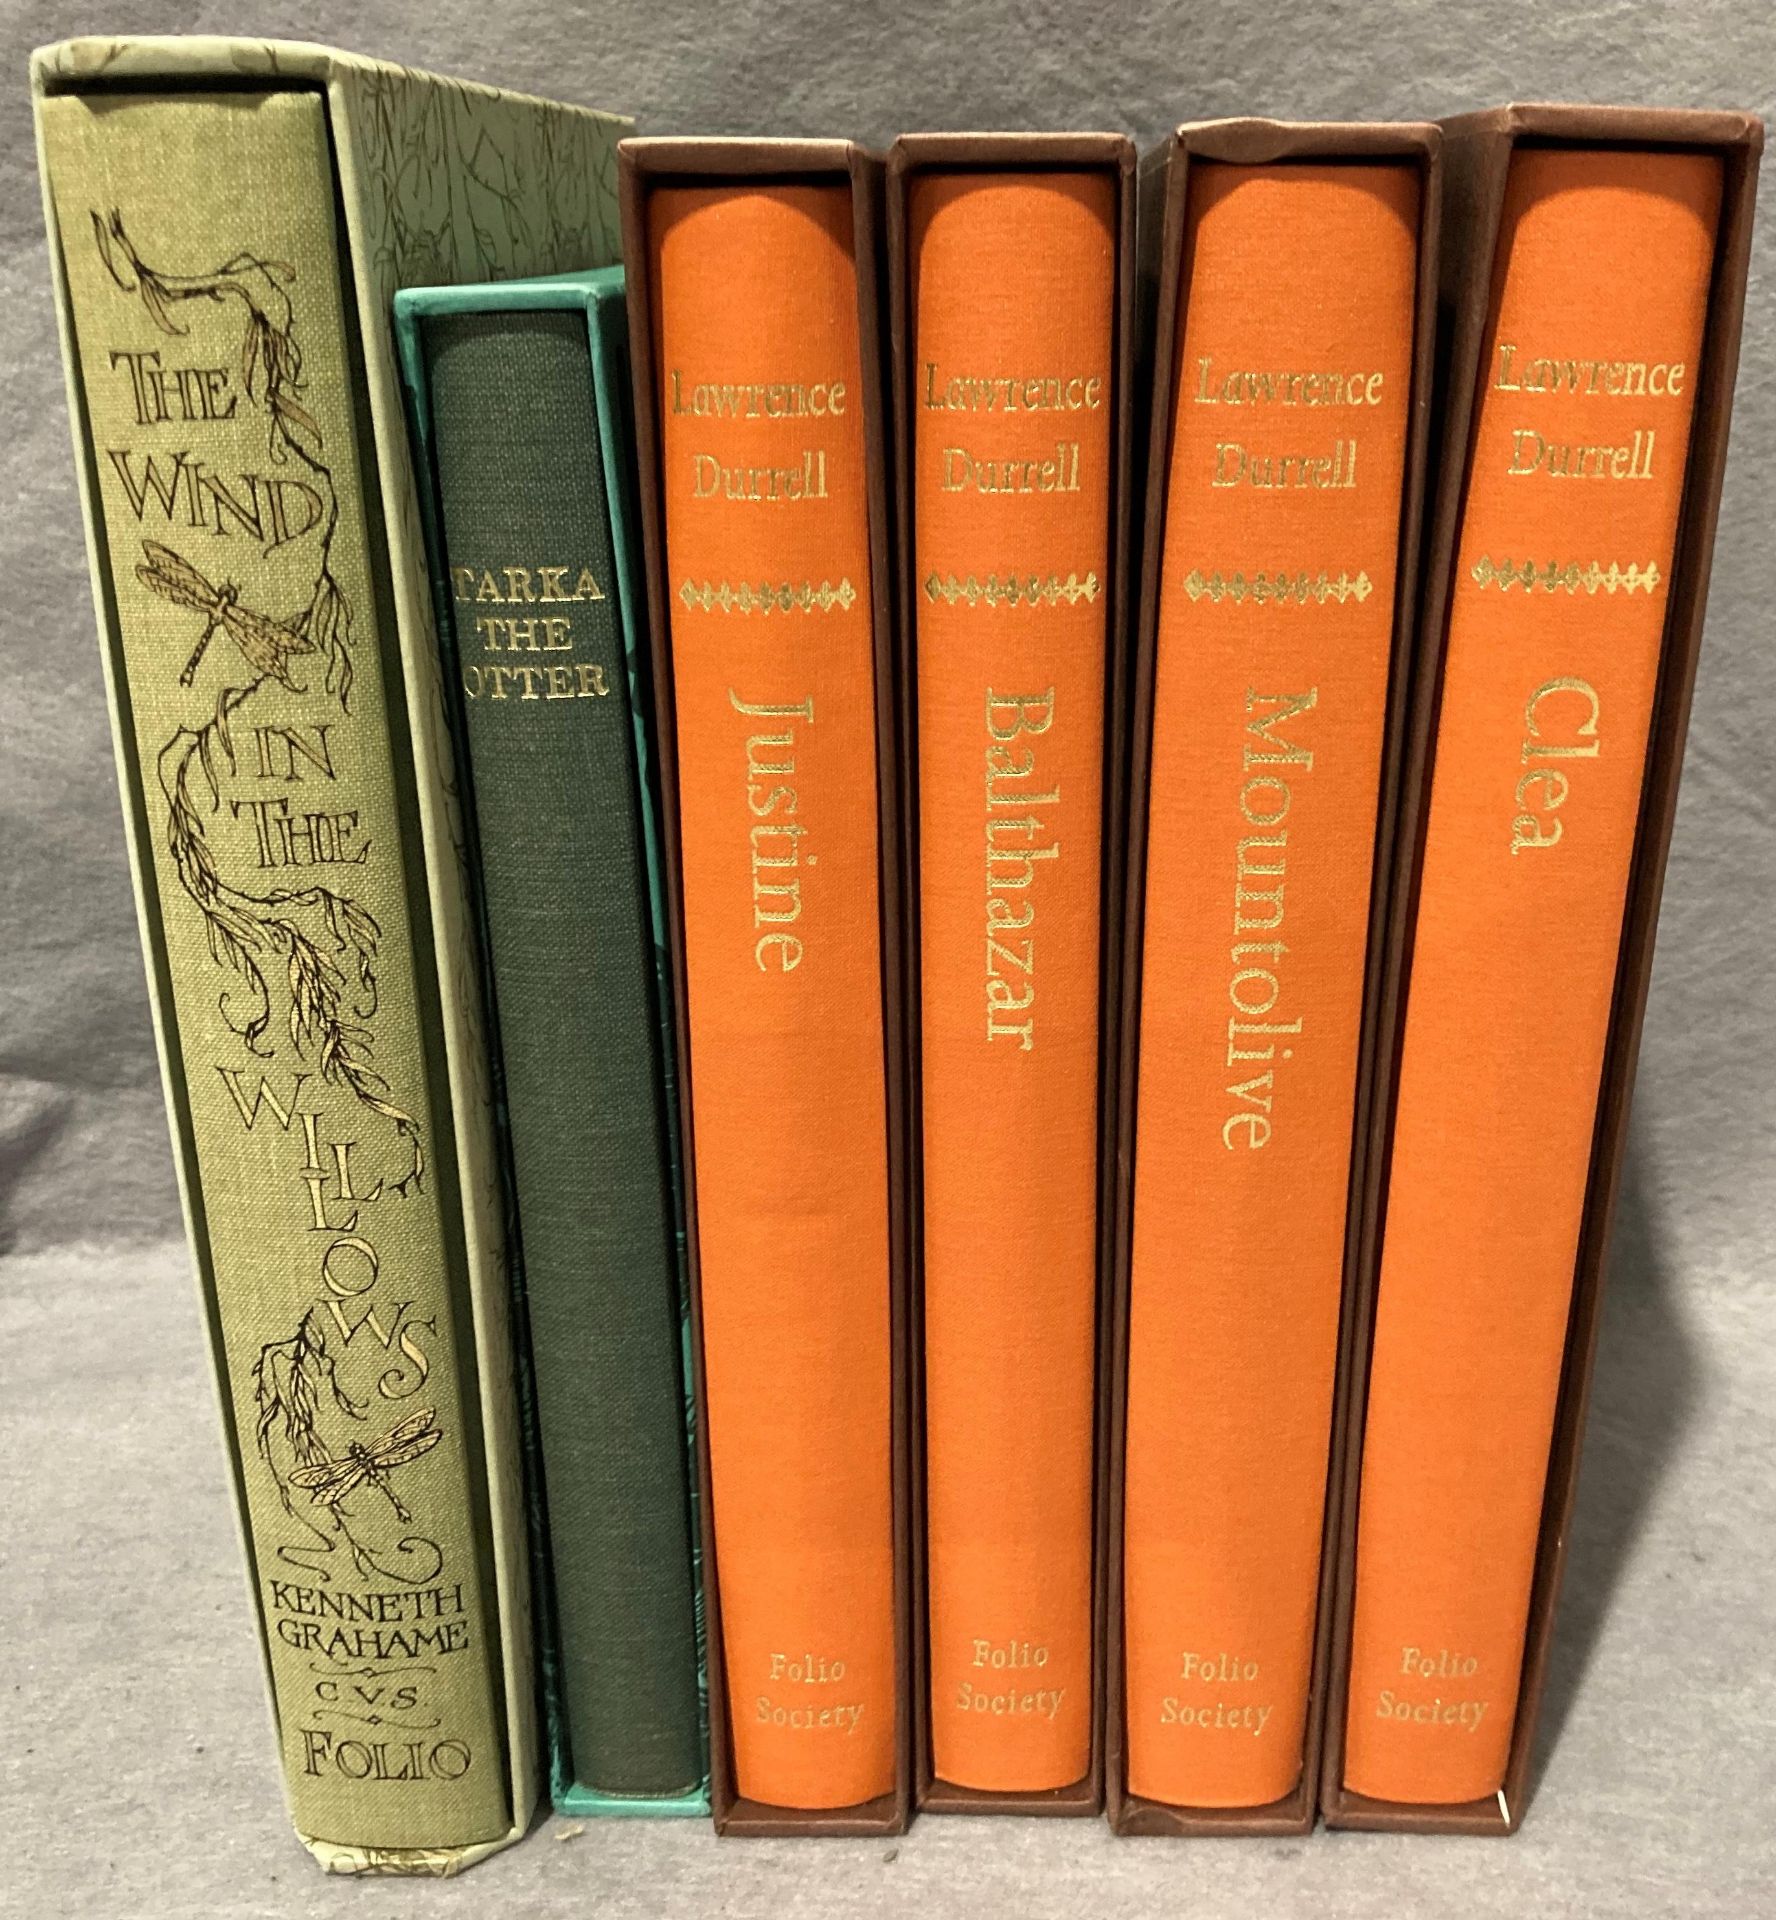 Folio Society - Six books including Kenneth Grahame 'The Wind in the Willows' (2nd printing, 2006),